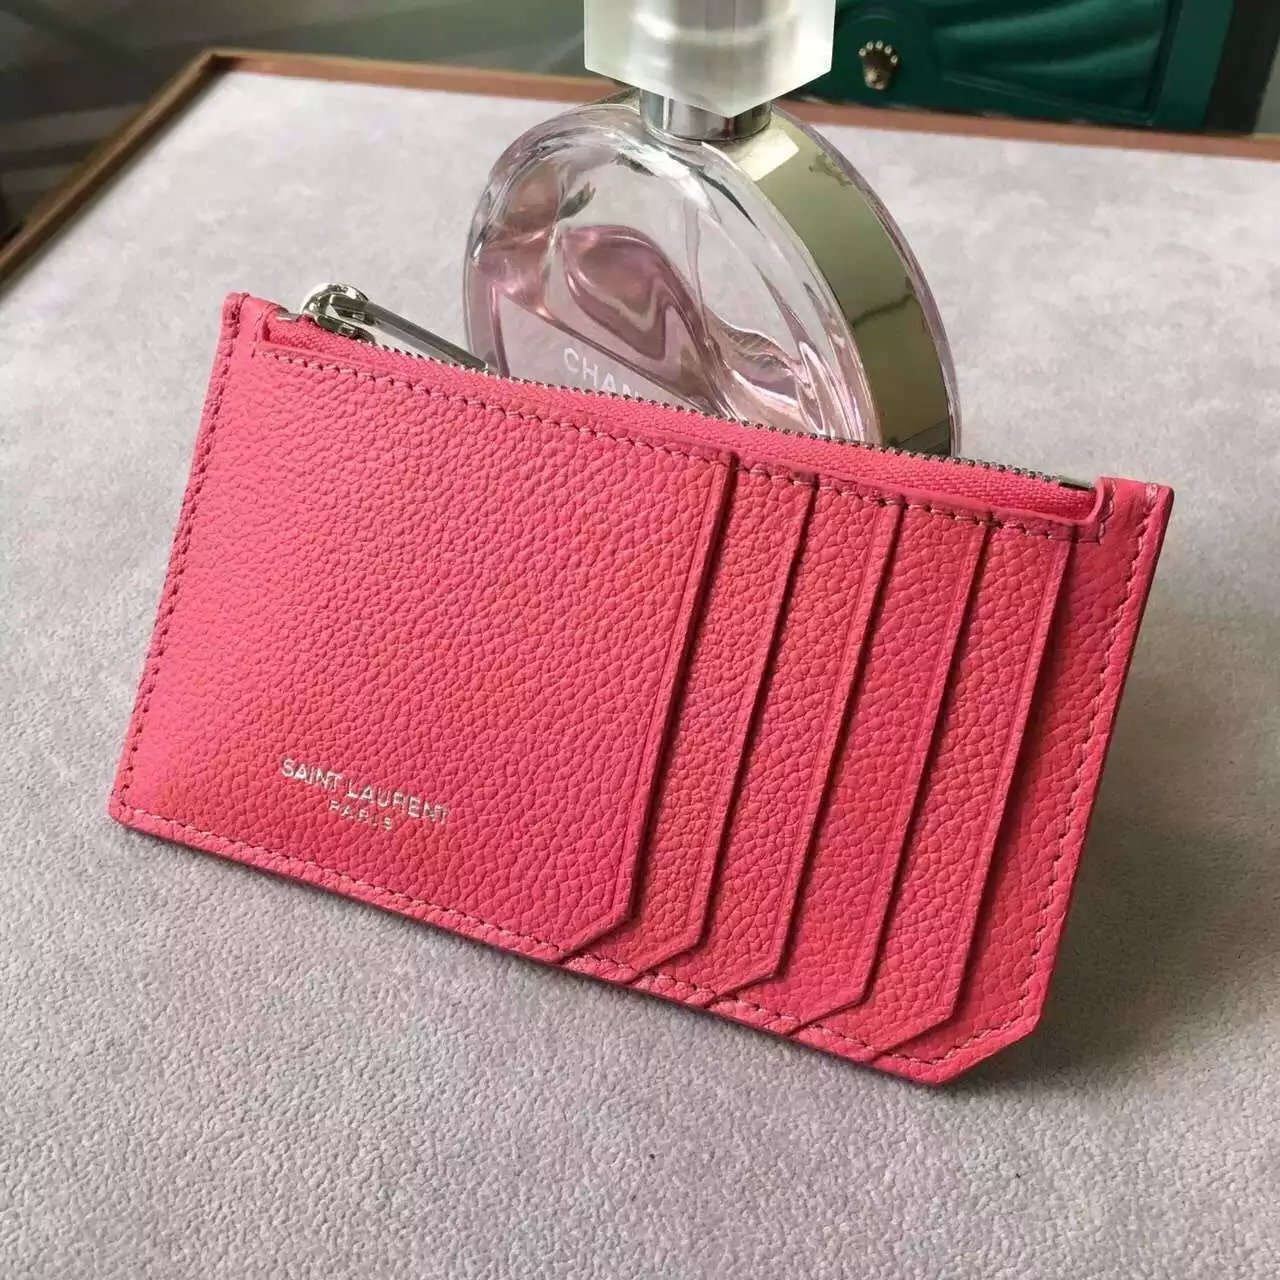 Limited Edition!2016 New Saint Laurent Small Leather Goods Cheap Sale-Saint Laurent Classic Paris 5 Fragments Zip Pouch in Lipstick Fuchsia Leather - Click Image to Close